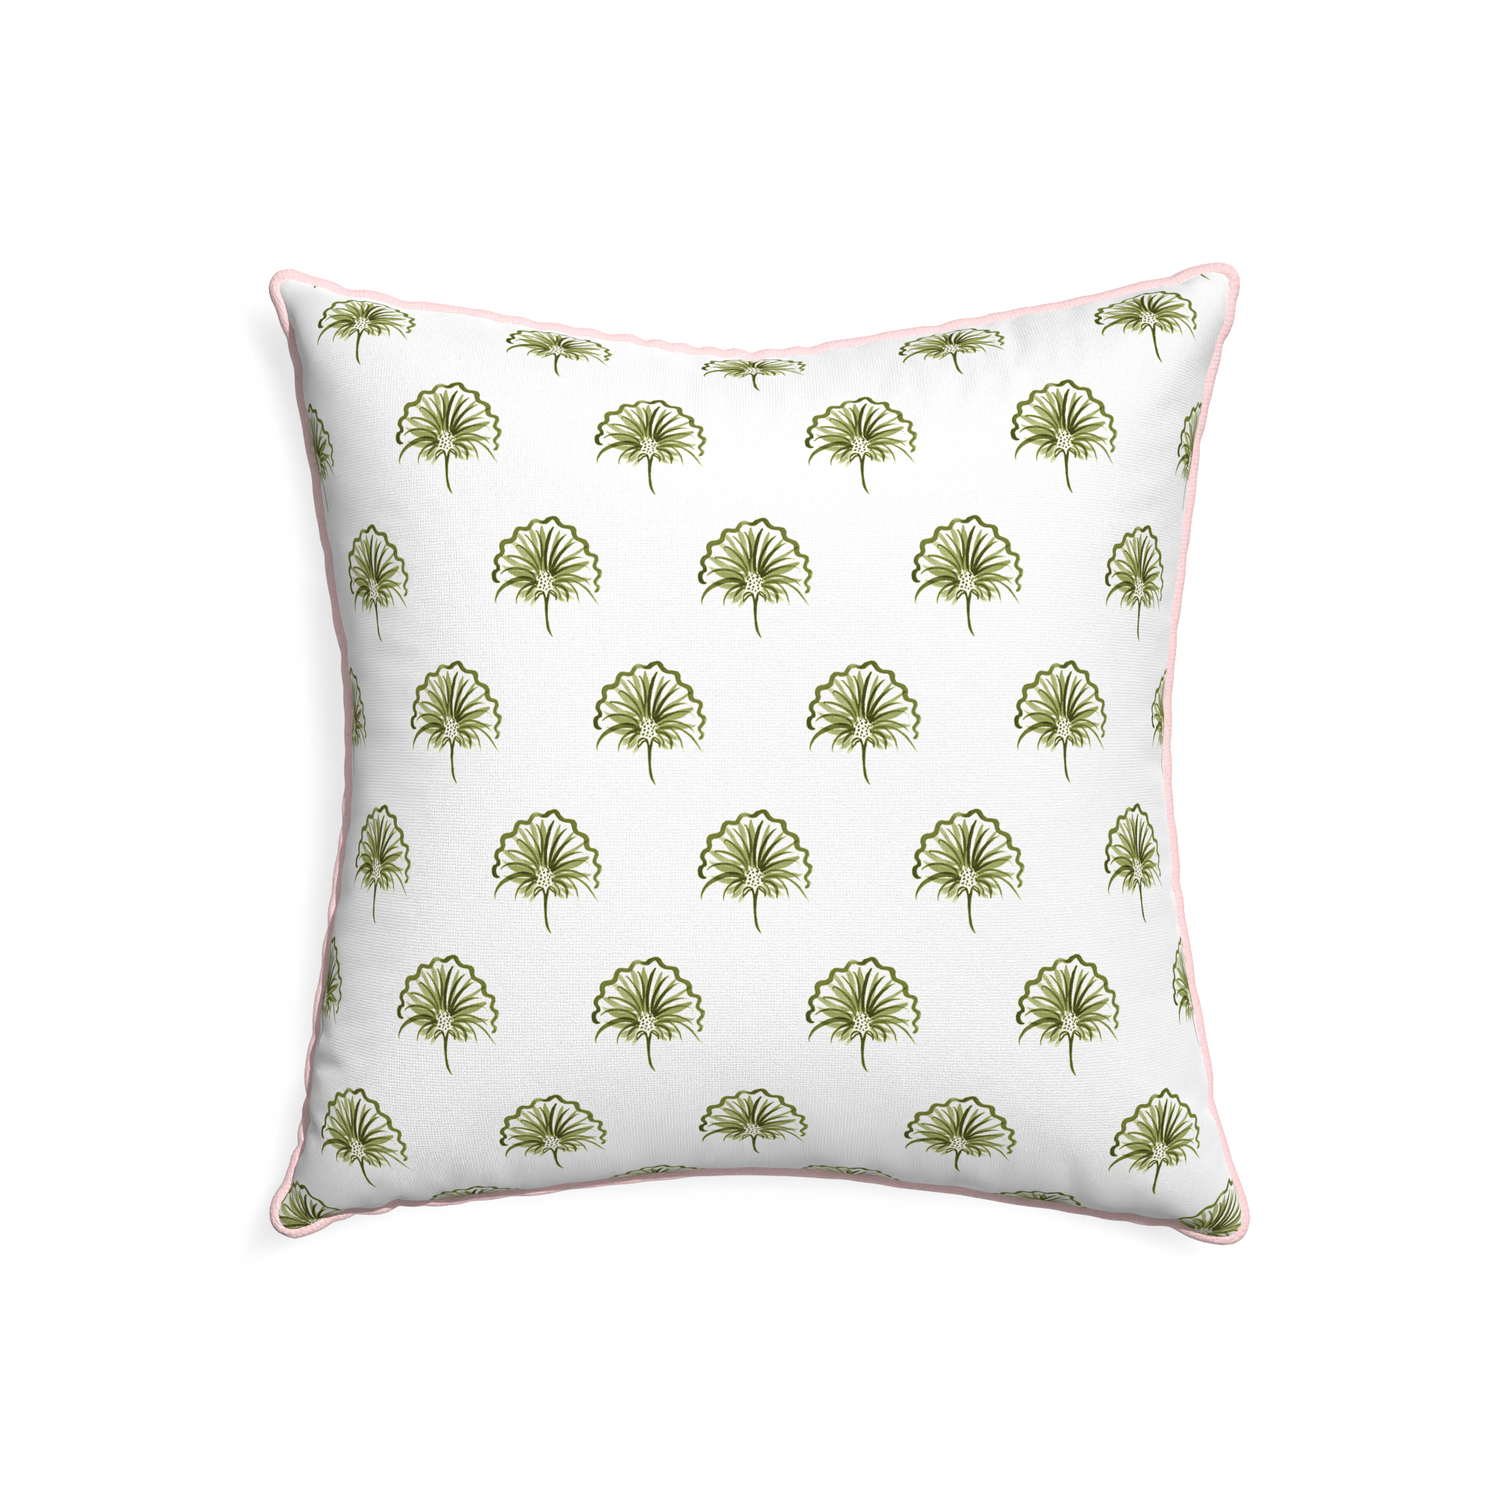 22-square penelope moss custom green floralpillow with petal piping on white background